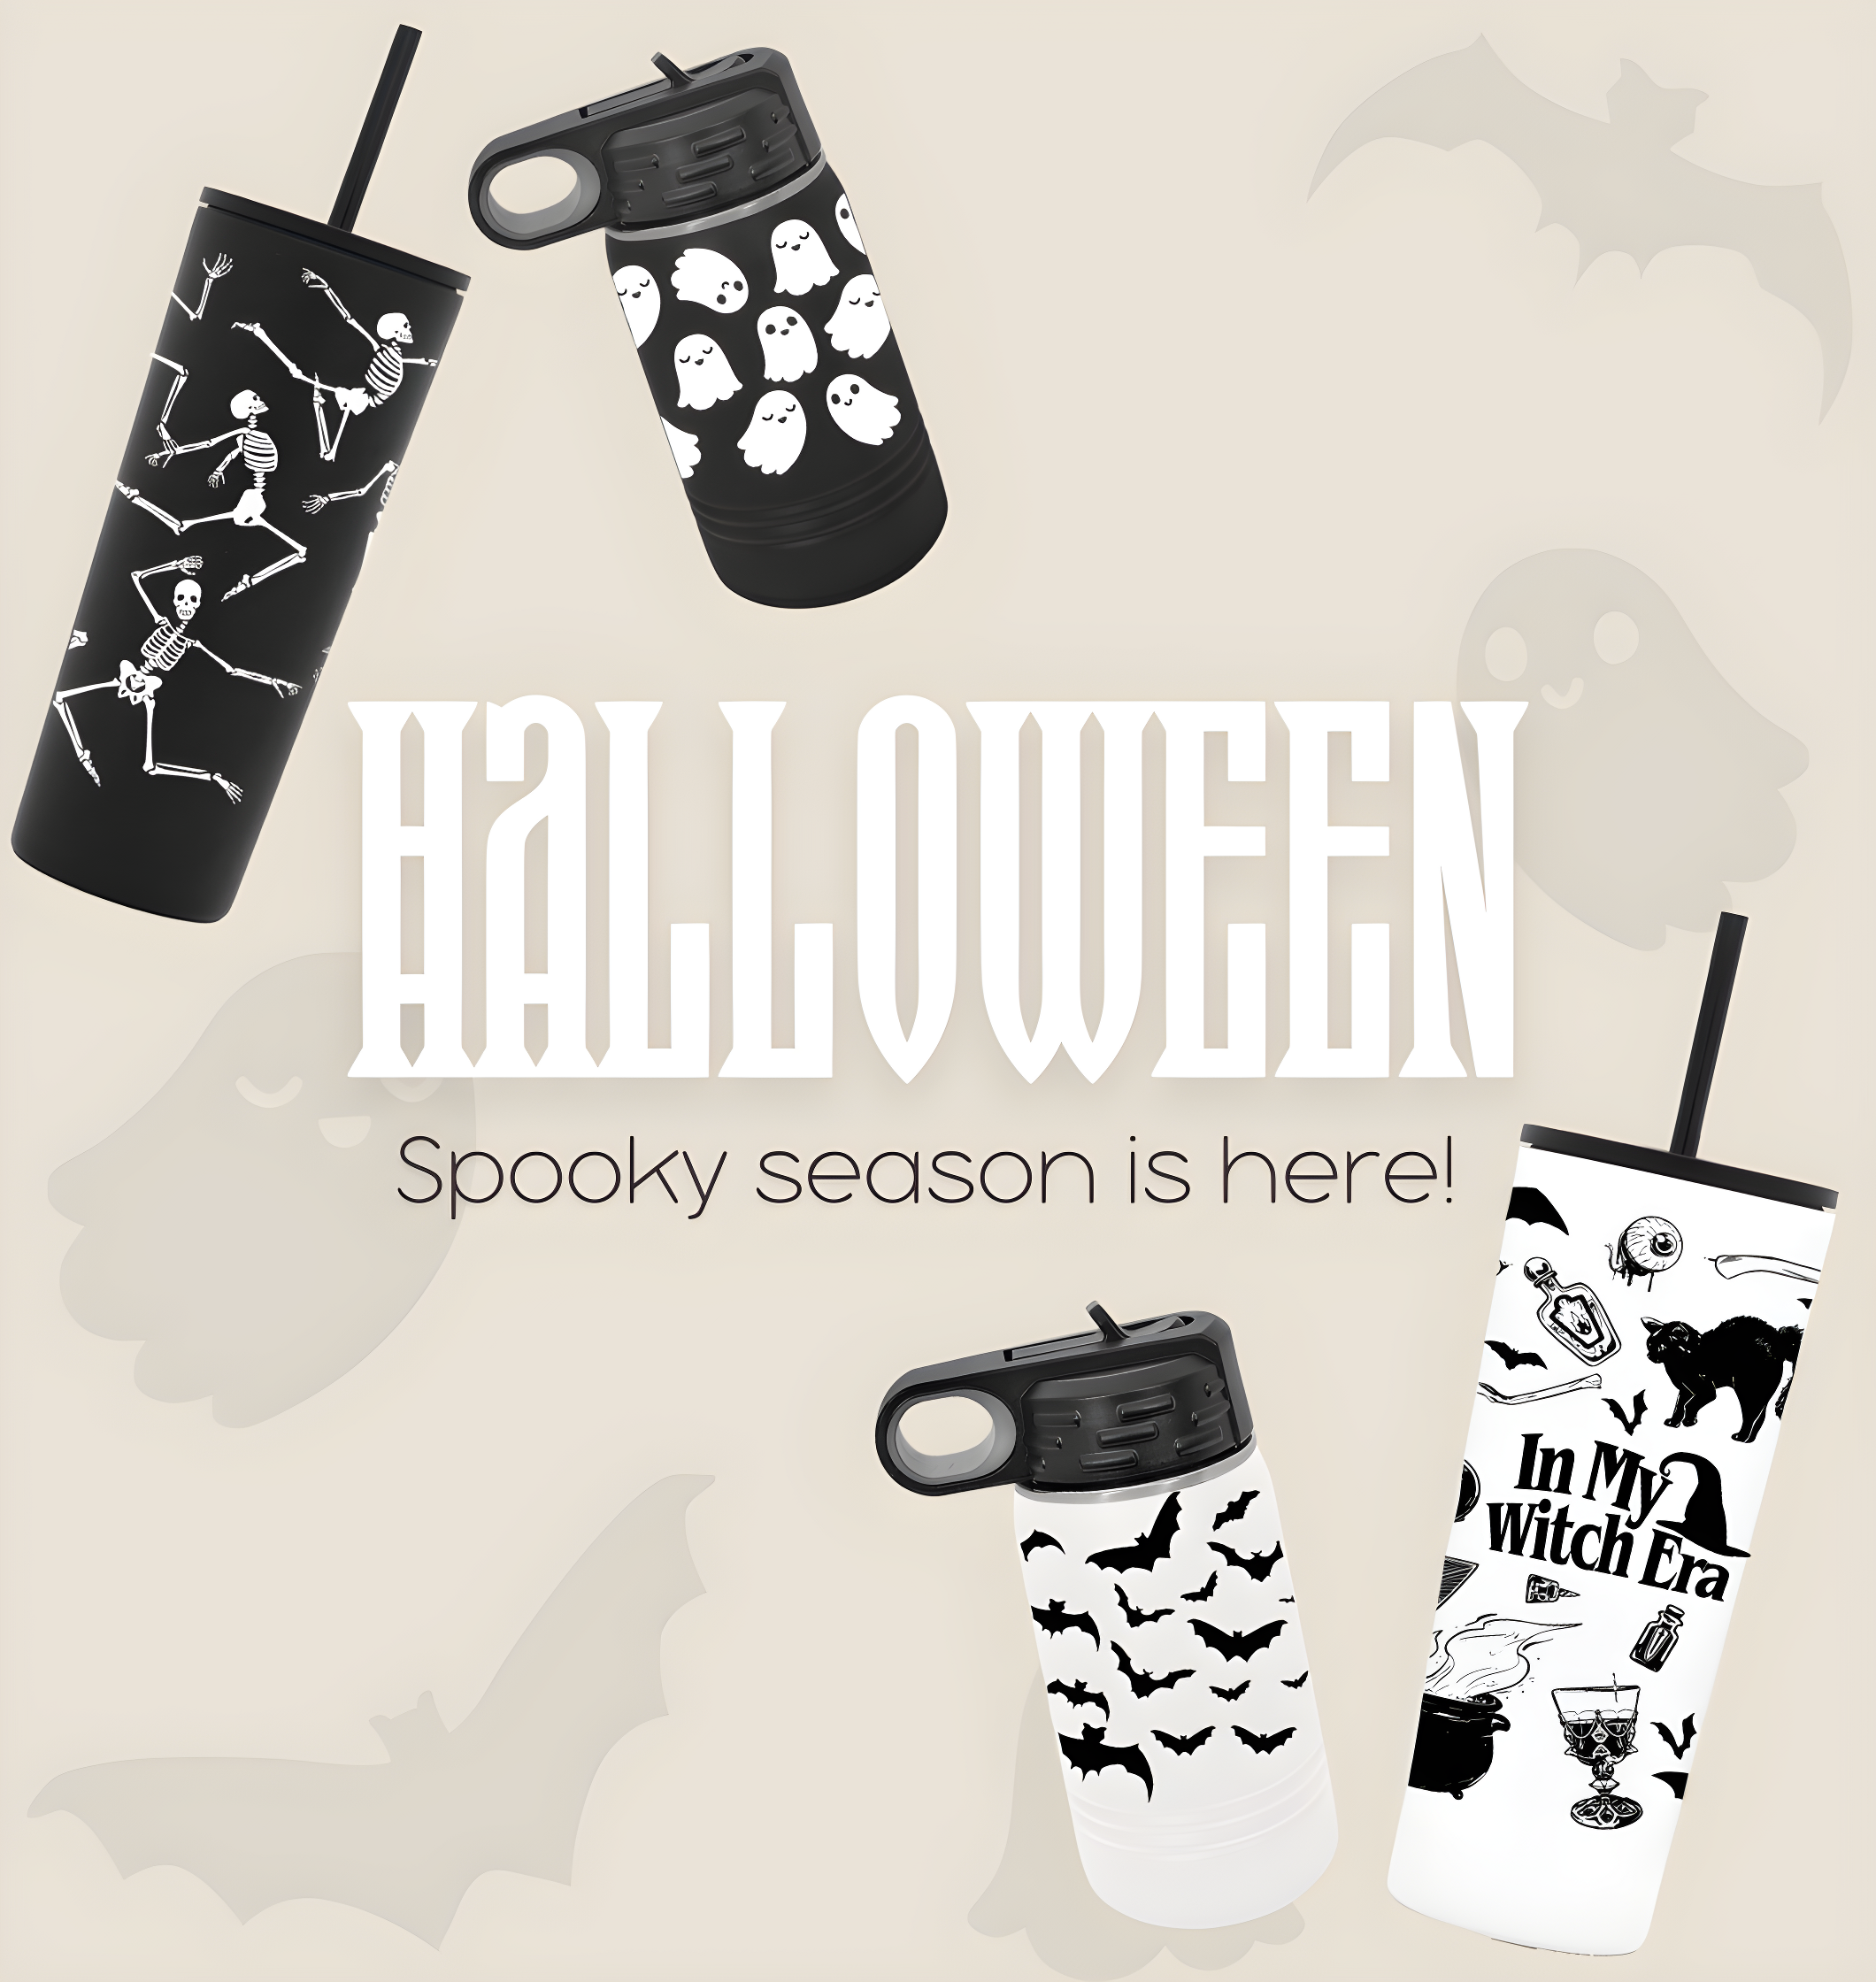 Halloween spooky season is here banner with halloween designs on stainless steel insulated cups and bottles